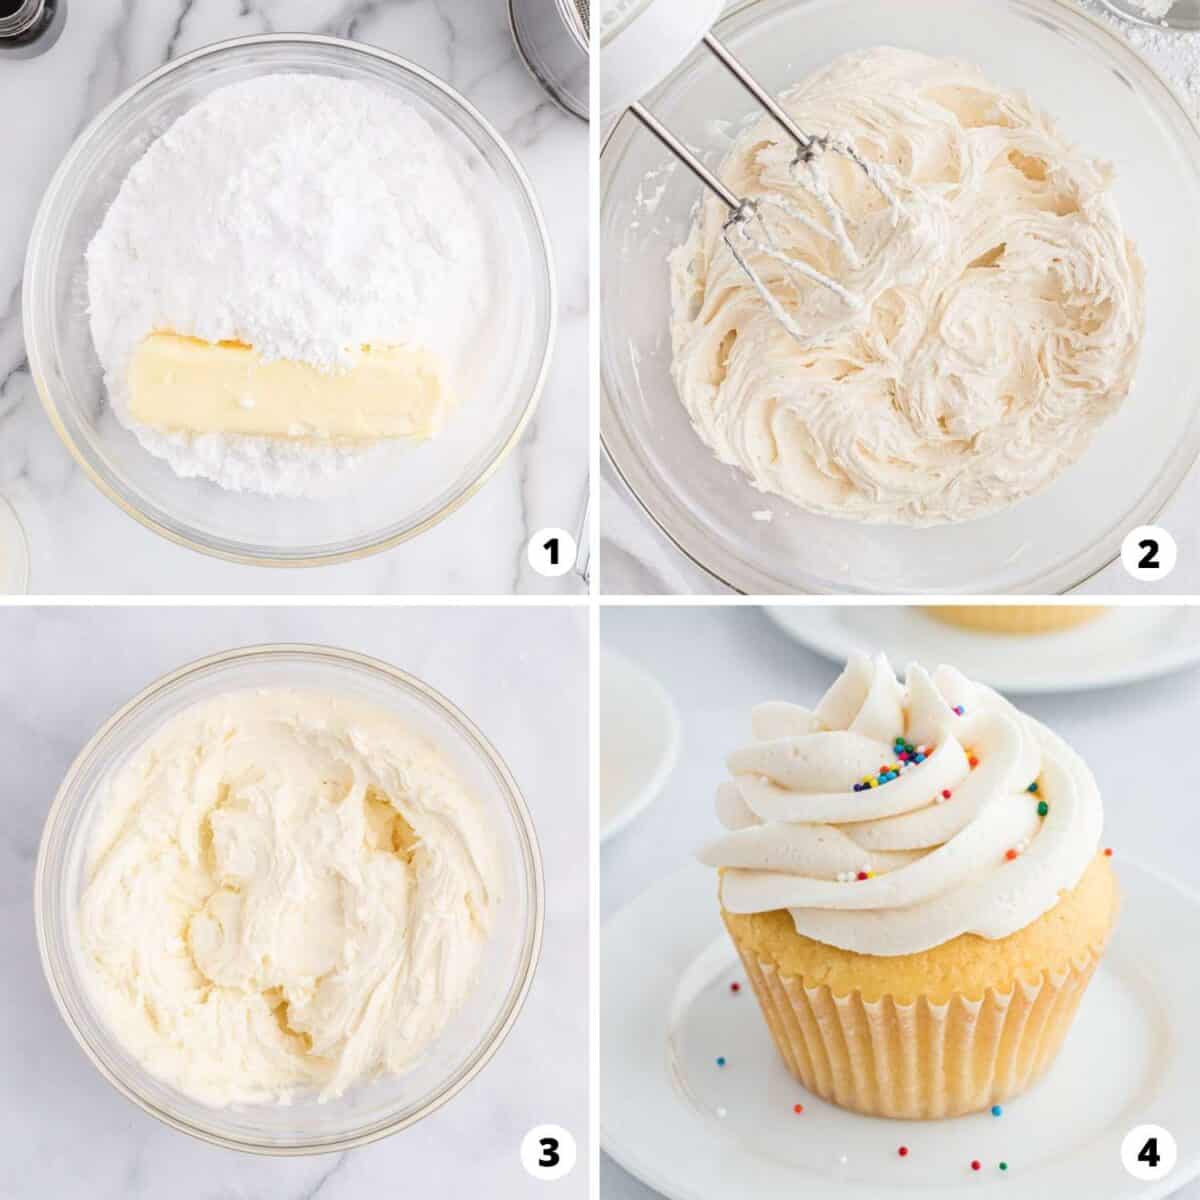 Showing how to make buttercream frosting in a 4 step collage.